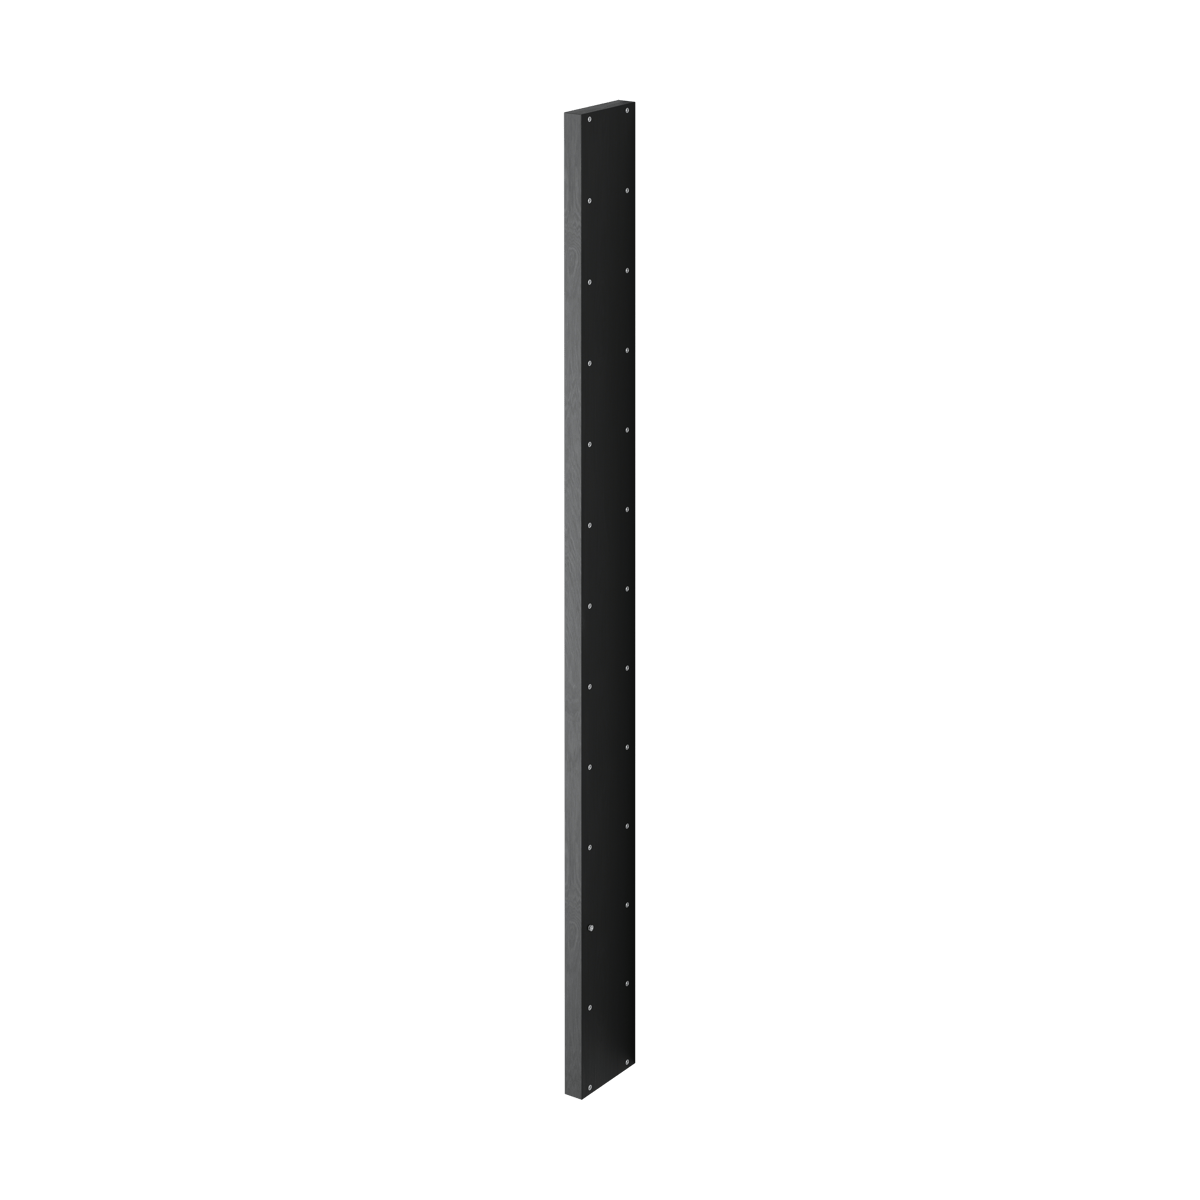 Massproductions Gridlock Linking Panel H1460 Black stained Ash